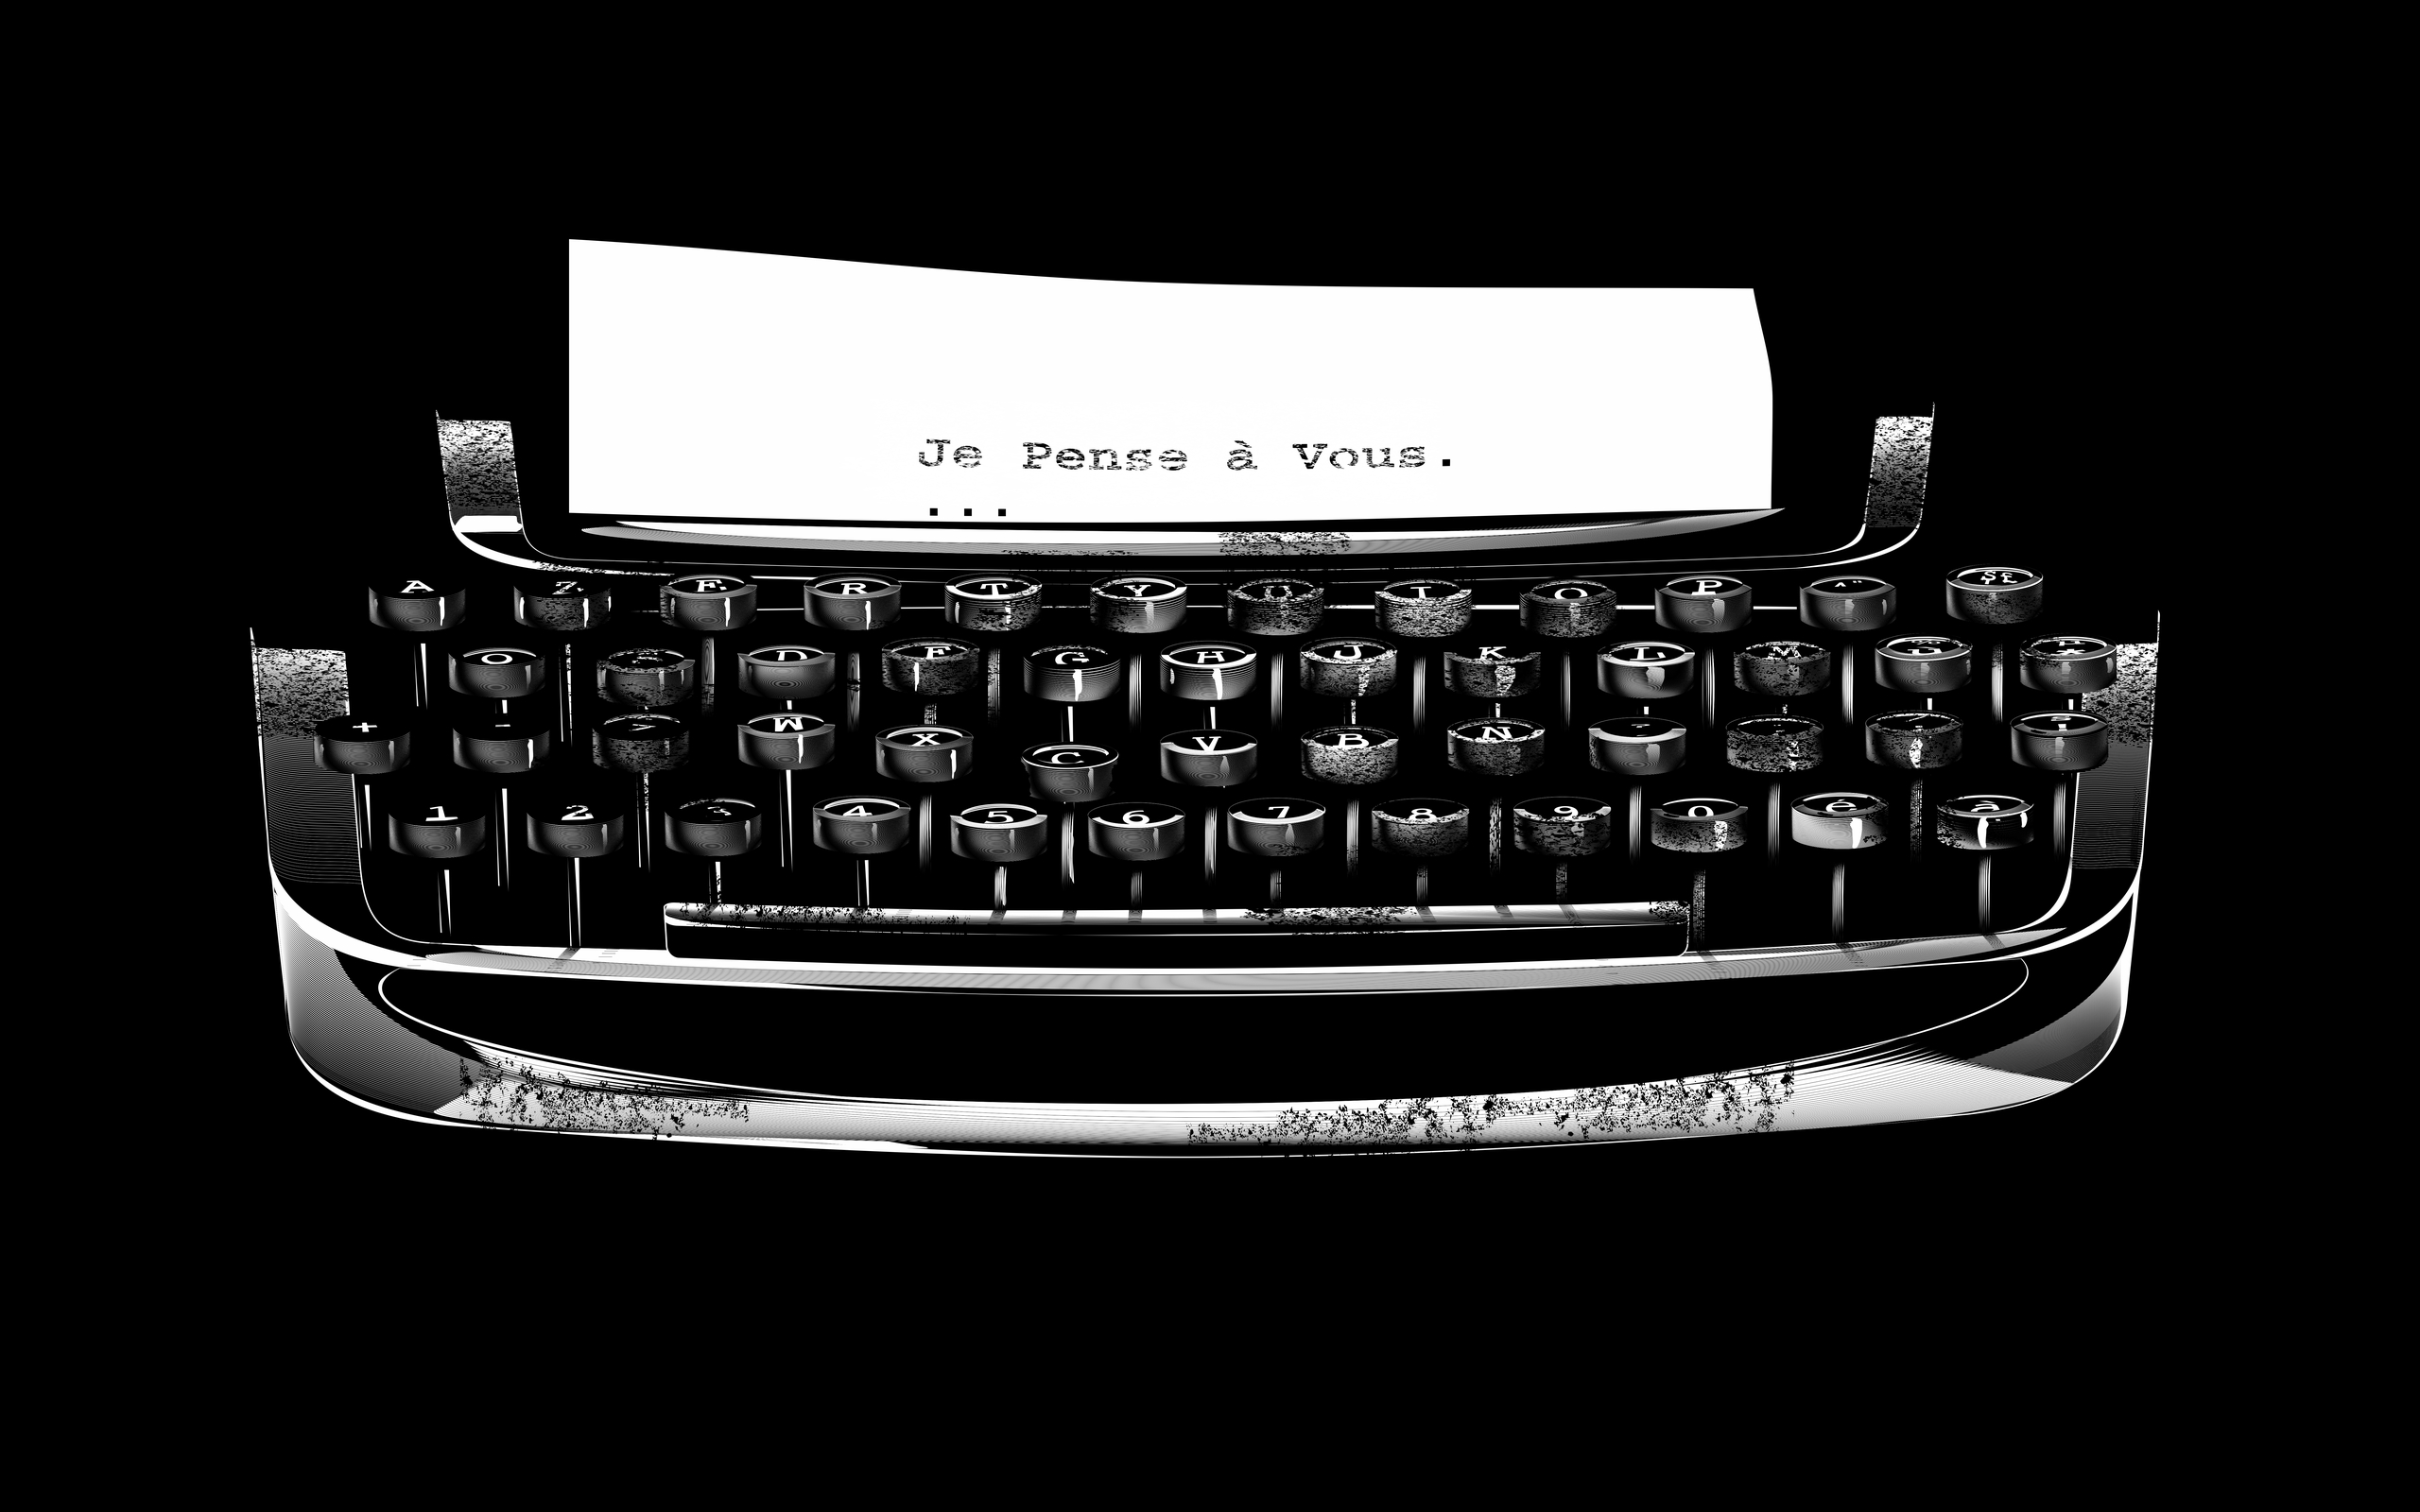 man made, typewriter for android